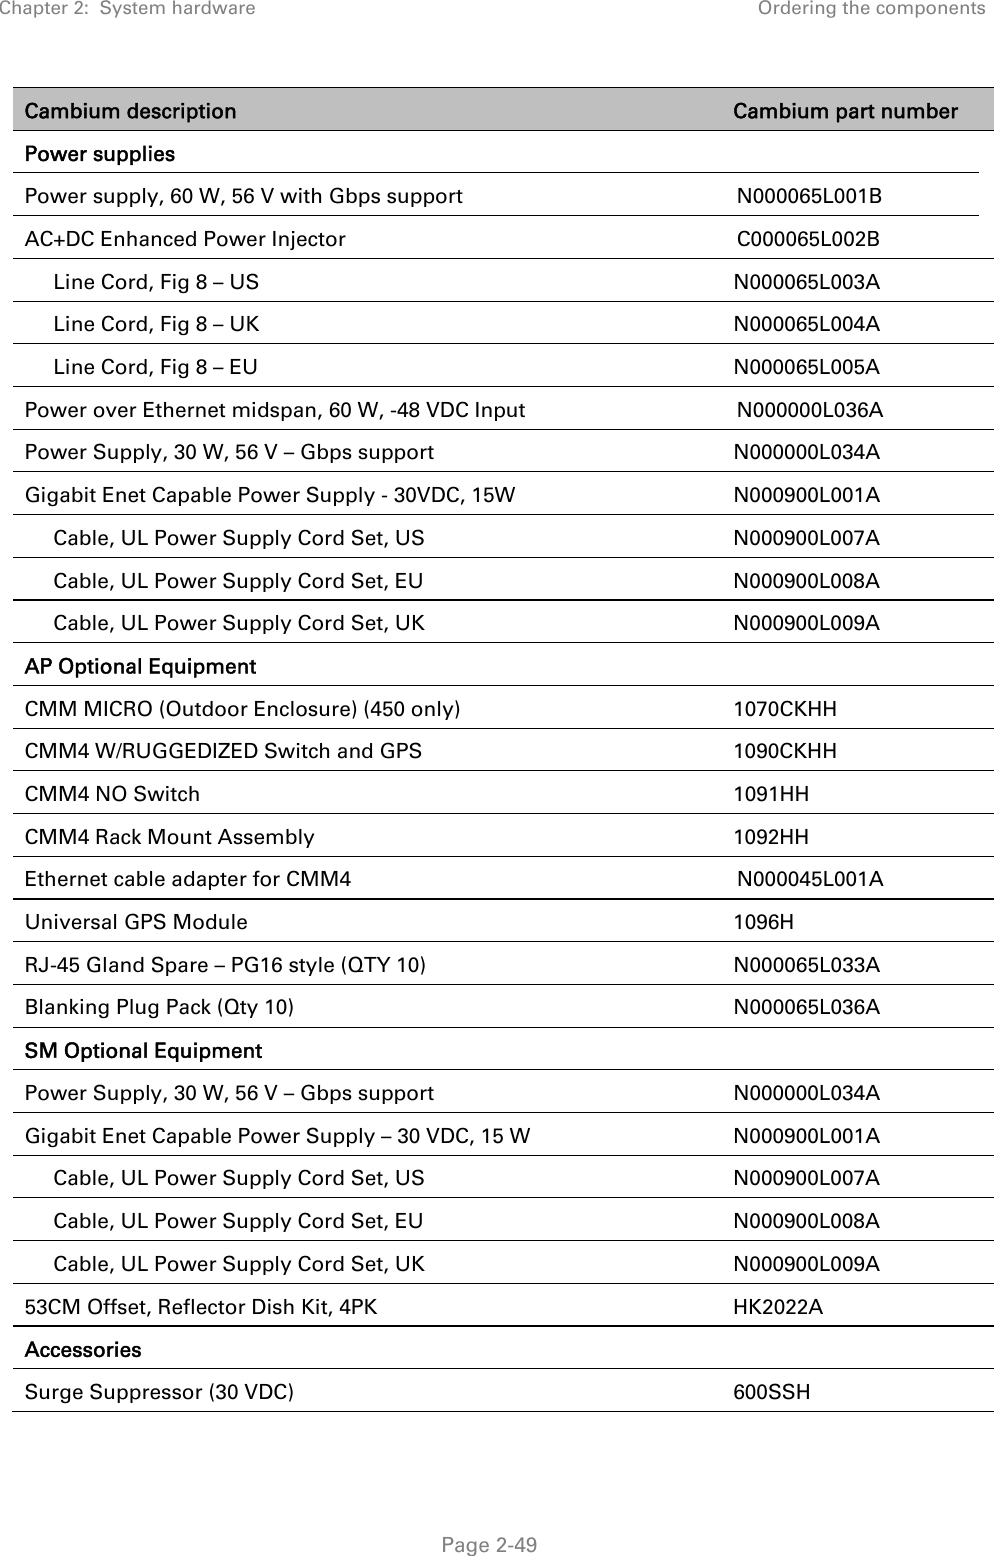 Chapter 2:  System hardware  Ordering the components   Page 2-49 Cambium description  Cambium part number Power supplies   Power supply, 60 W, 56 V with Gbps support  N000065L001B AC+DC Enhanced Power Injector  C000065L002B      Line Cord, Fig 8 – US  N000065L003A      Line Cord, Fig 8 – UK  N000065L004A      Line Cord, Fig 8 – EU  N000065L005A Power over Ethernet midspan, 60 W, -48 VDC Input  N000000L036A Power Supply, 30 W, 56 V – Gbps support N000000L034A Gigabit Enet Capable Power Supply - 30VDC, 15W N000900L001A      Cable, UL Power Supply Cord Set, US  N000900L007A      Cable, UL Power Supply Cord Set, EU  N000900L008A      Cable, UL Power Supply Cord Set, UK  N000900L009A AP Optional Equipment   CMM MICRO (Outdoor Enclosure) (450 only)  1070CKHH CMM4 W/RUGGEDIZED Switch and GPS  1090CKHH CMM4 NO Switch  1091HH CMM4 Rack Mount Assembly  1092HH Ethernet cable adapter for CMM4  N000045L001A Universal GPS Module  1096H RJ-45 Gland Spare – PG16 style (QTY 10)  N000065L033A Blanking Plug Pack (Qty 10)  N000065L036A SM Optional Equipment   Power Supply, 30 W, 56 V – Gbps support N000000L034A Gigabit Enet Capable Power Supply – 30 VDC, 15 W N000900L001A      Cable, UL Power Supply Cord Set, US  N000900L007A      Cable, UL Power Supply Cord Set, EU  N000900L008A      Cable, UL Power Supply Cord Set, UK  N000900L009A 53CM Offset, Reflector Dish Kit, 4PK  HK2022A Accessories   Surge Suppressor (30 VDC)  600SSH 